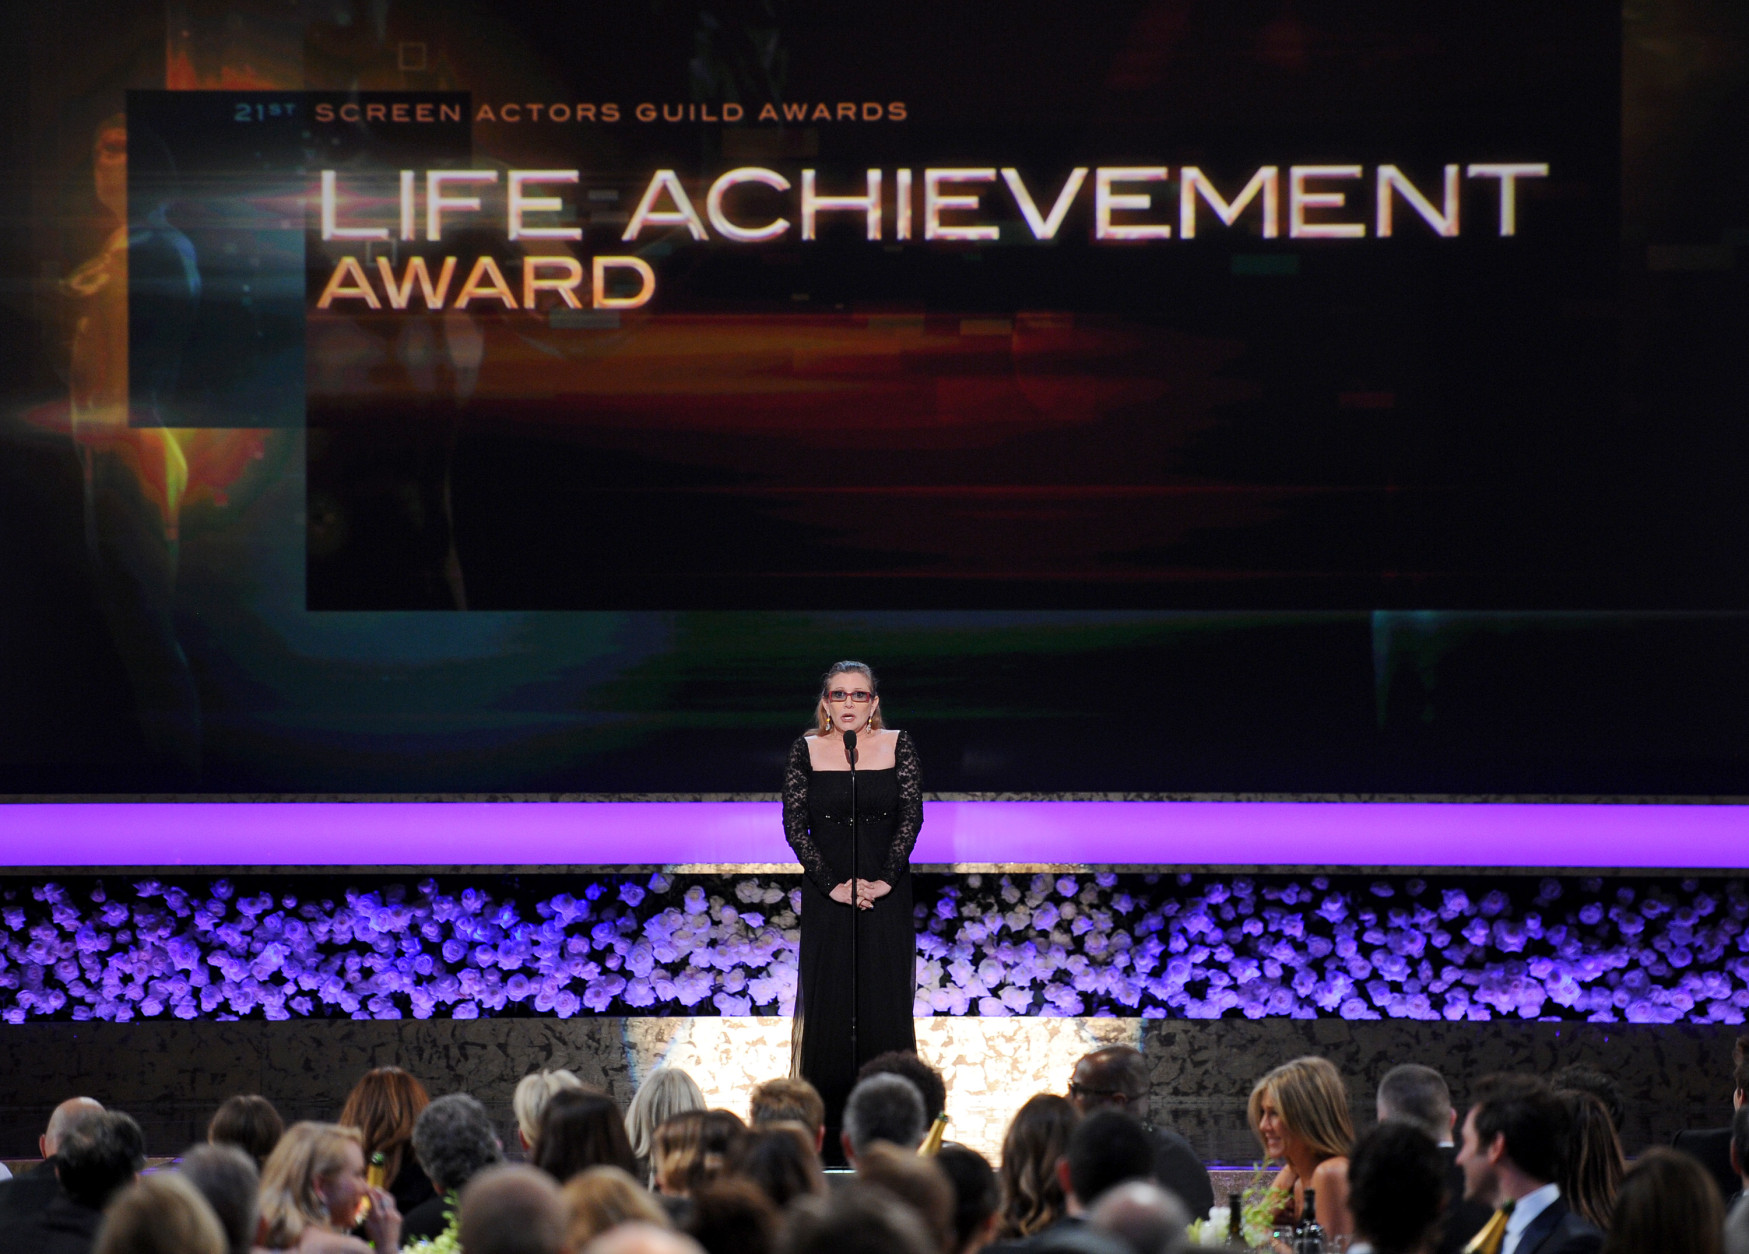 Carrie Fisher presents the life achievement award on stage at the 21st annual Screen Actors Guild Awards at the Shrine Auditorium on Sunday, Jan. 25, 2015, in Los Angeles. (Photo by Vince Bucci/Invision/AP)